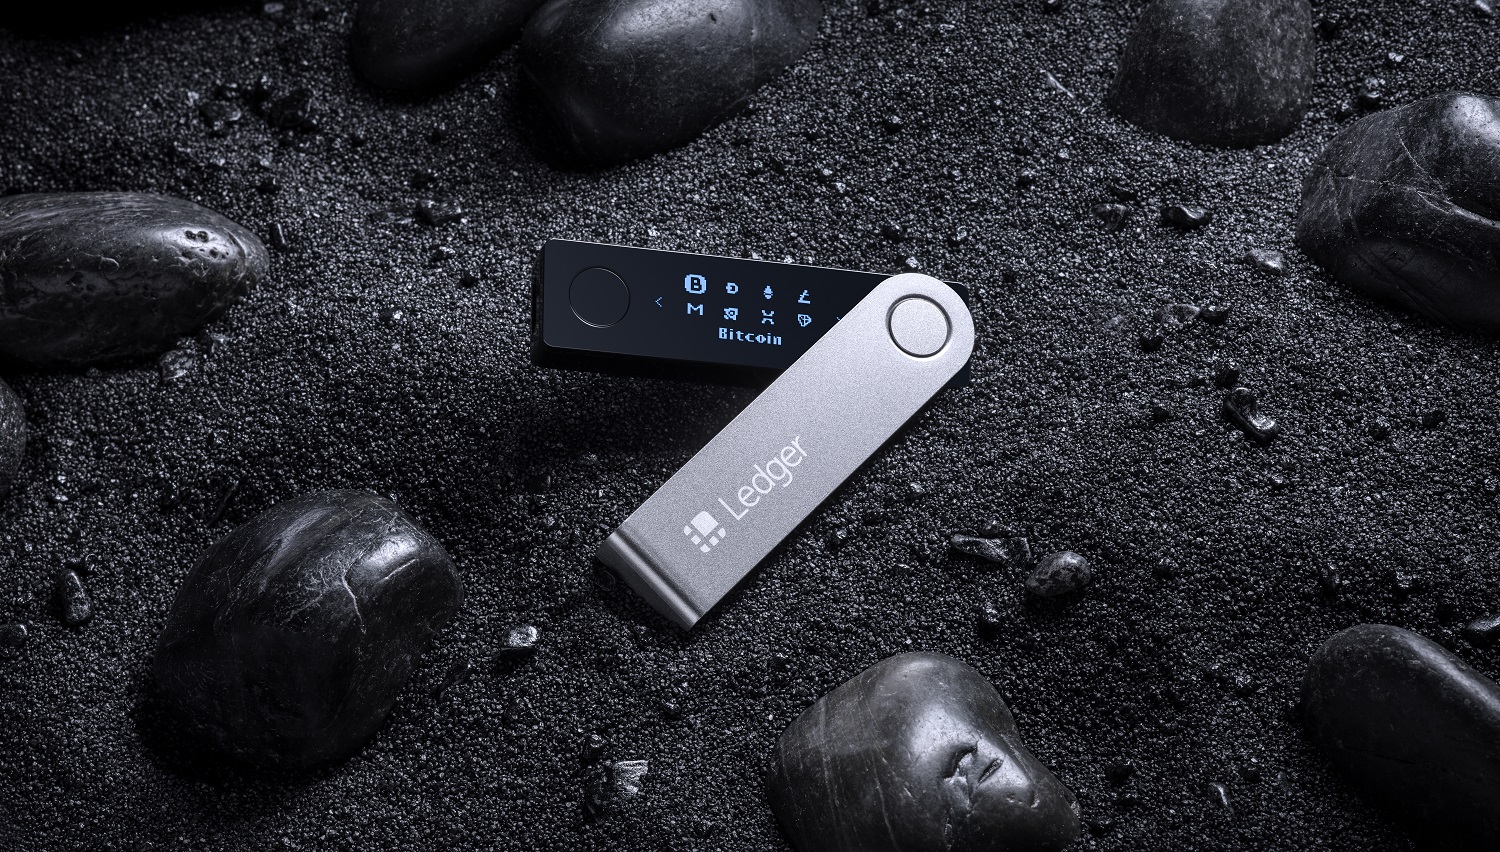 Ledger Crypto Wallet Goes Mobile With Bluetooth-Ready Nano X